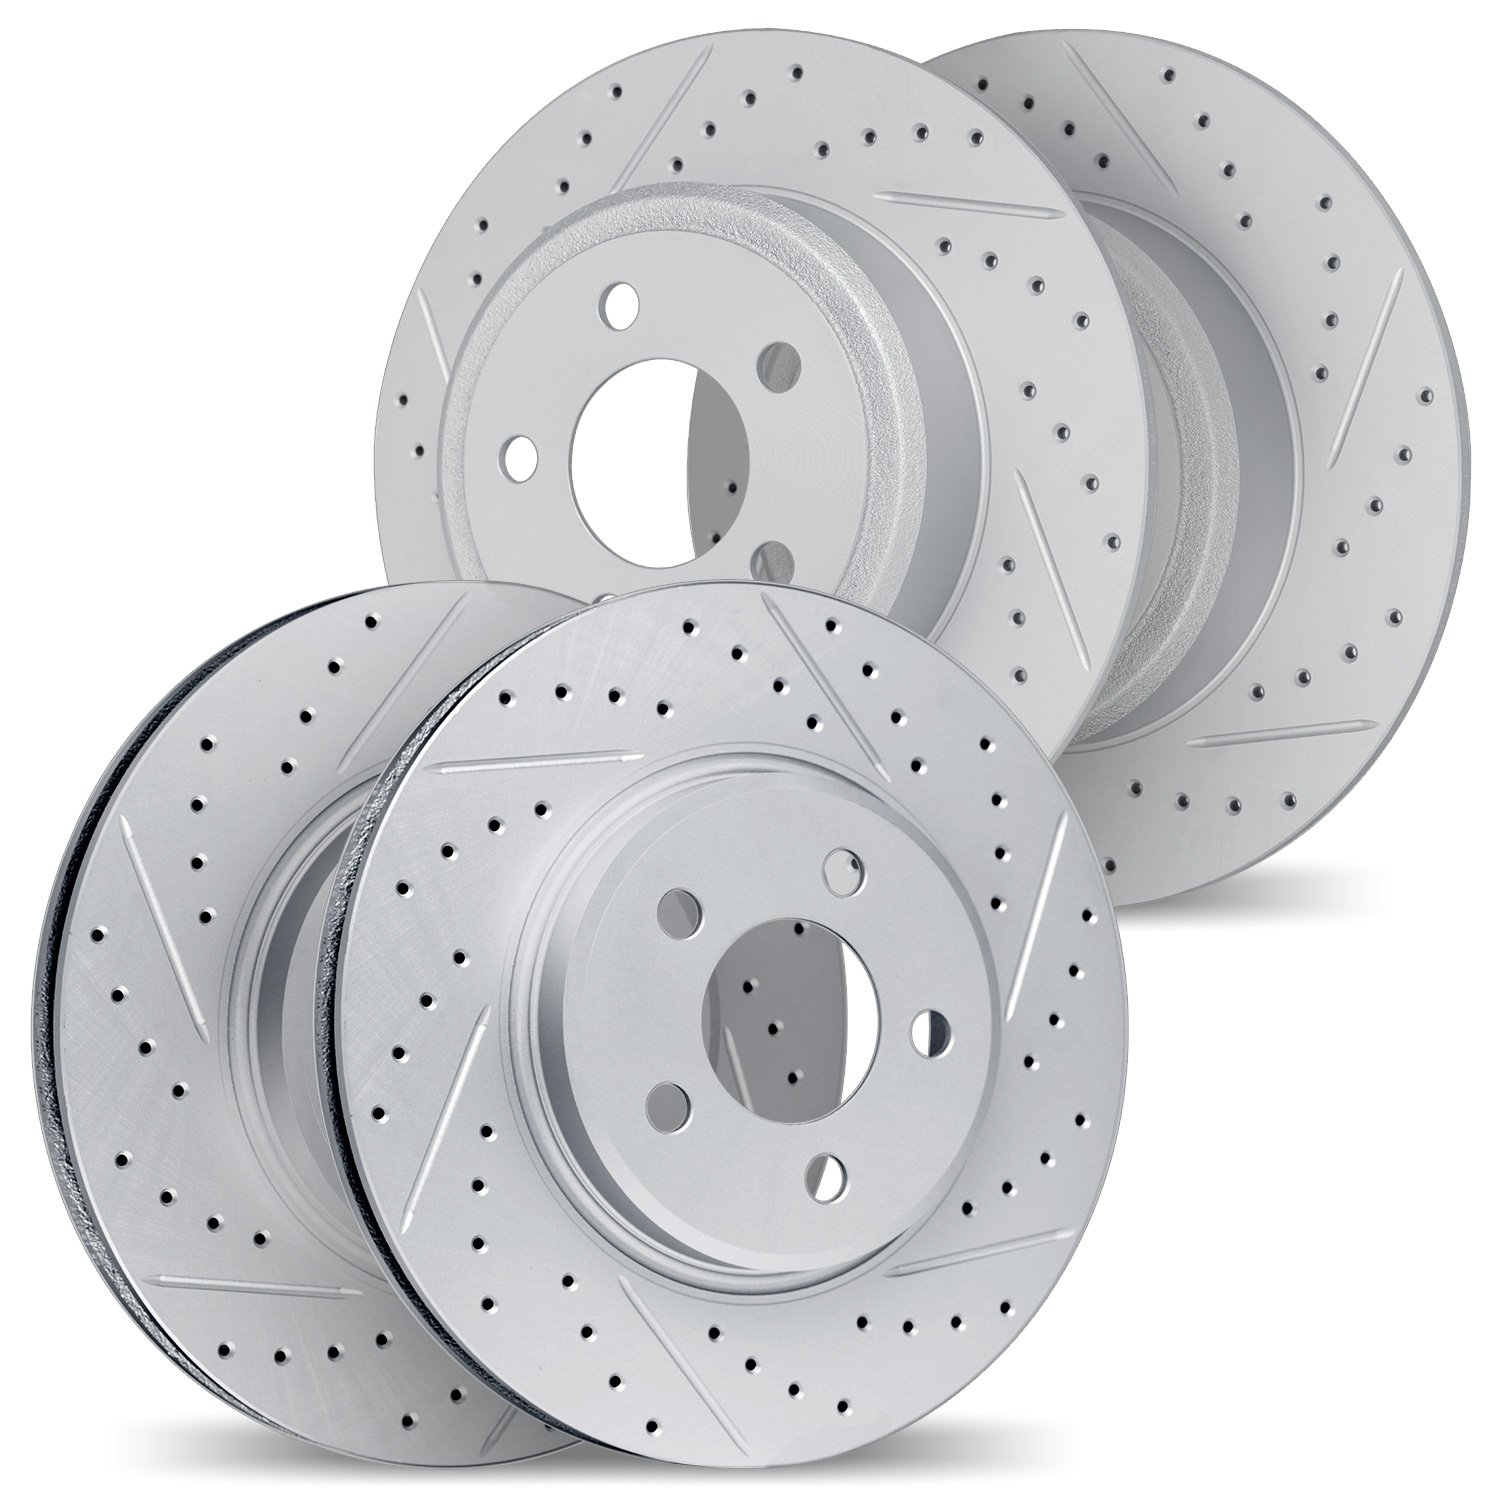 2004-03028 Geoperformance Drilled/Slotted Brake Rotors, 2009-2011 Kia/Hyundai/Genesis, Position: Front and Rear